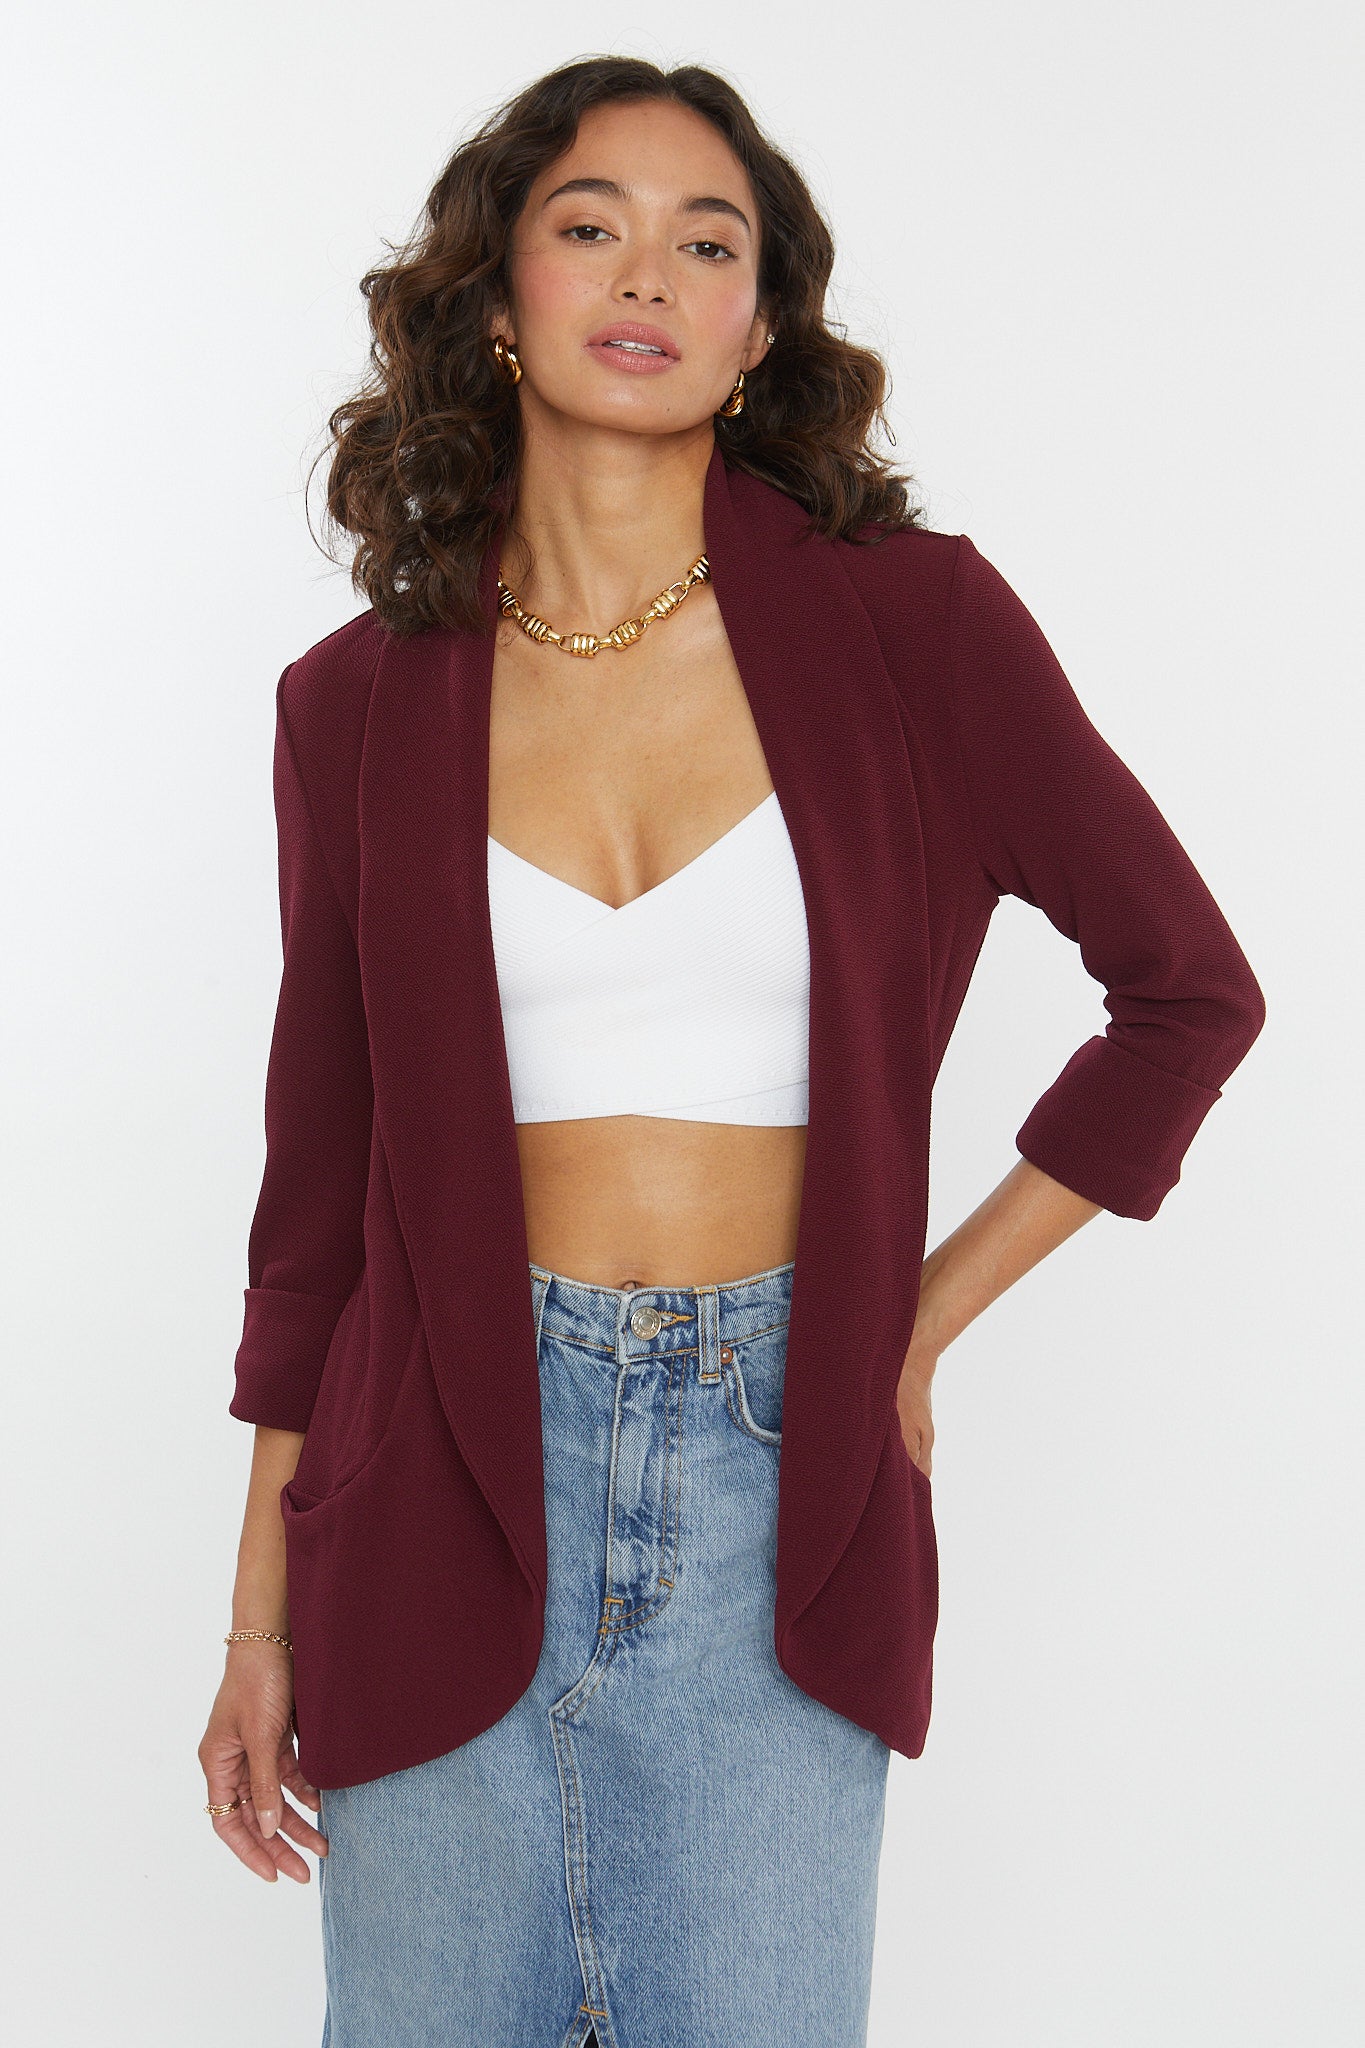 Classic Melanie Shawl Simple Staple Burgundy Color Workwear Office Wear Women’s Outerwear Blazer Jacket Everyday Shawl Front Pockets Best Seller Customer Favorite Casual Style Everyday Jacket